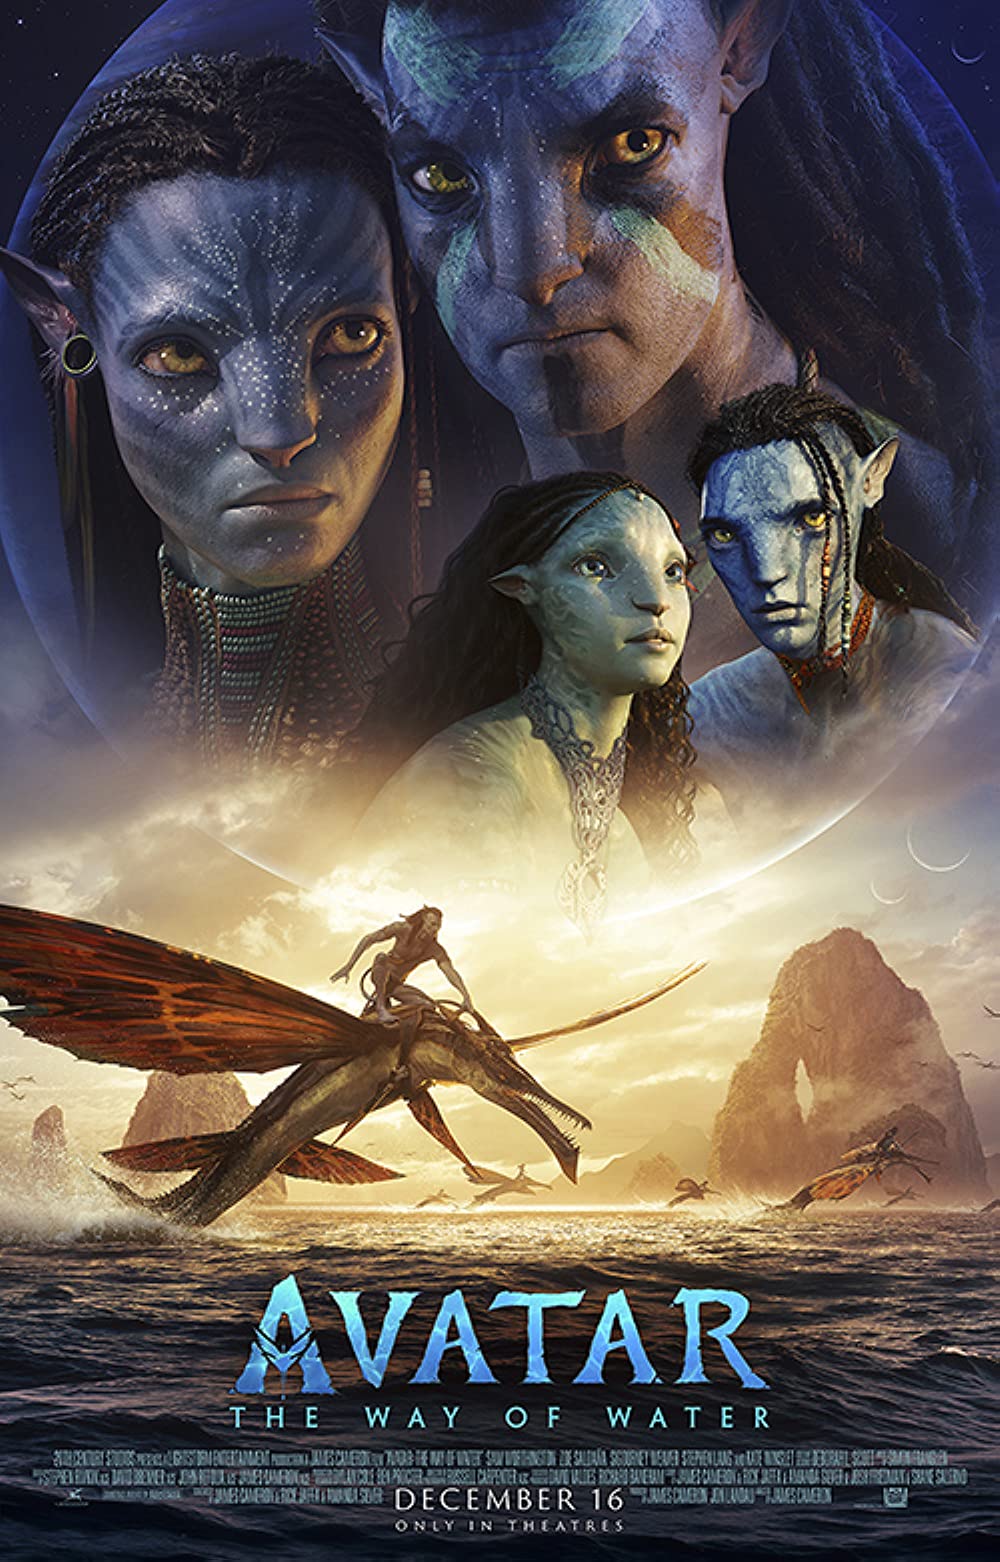 Avatar The Way of Water 2022 Official Hindi Trailer 1080p HDRip 50MB Download